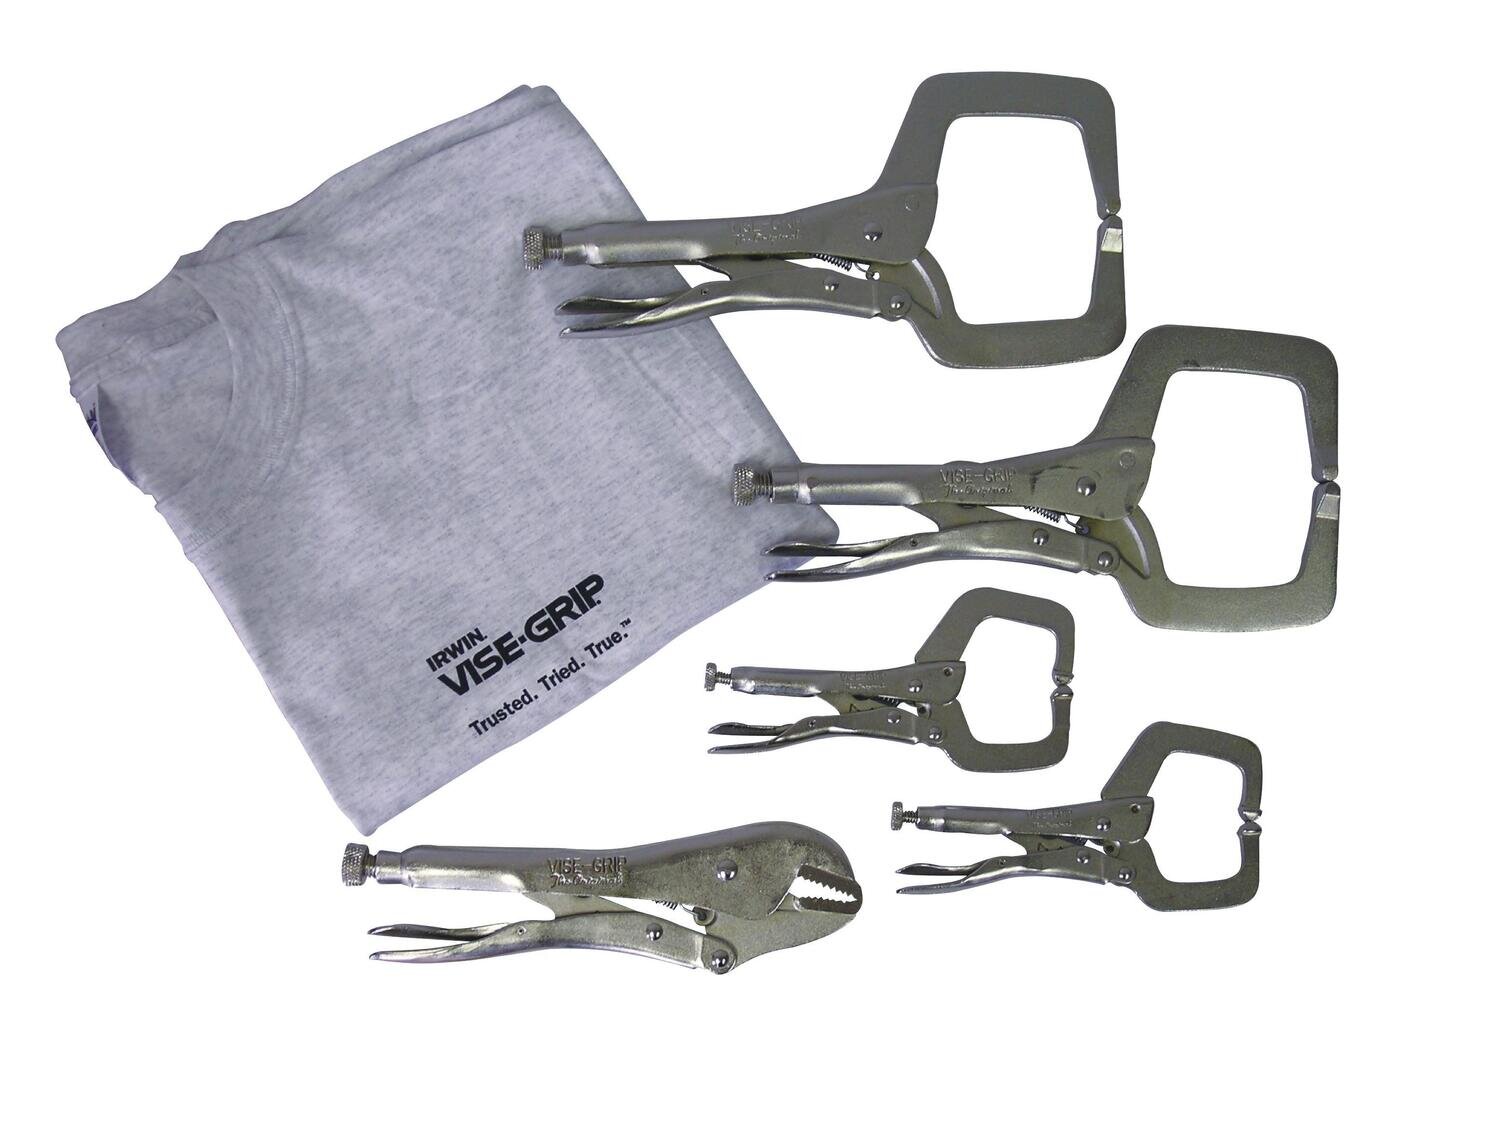 VG74 - 5 Piece Vise-Grip® Clamp Set with T-shirt